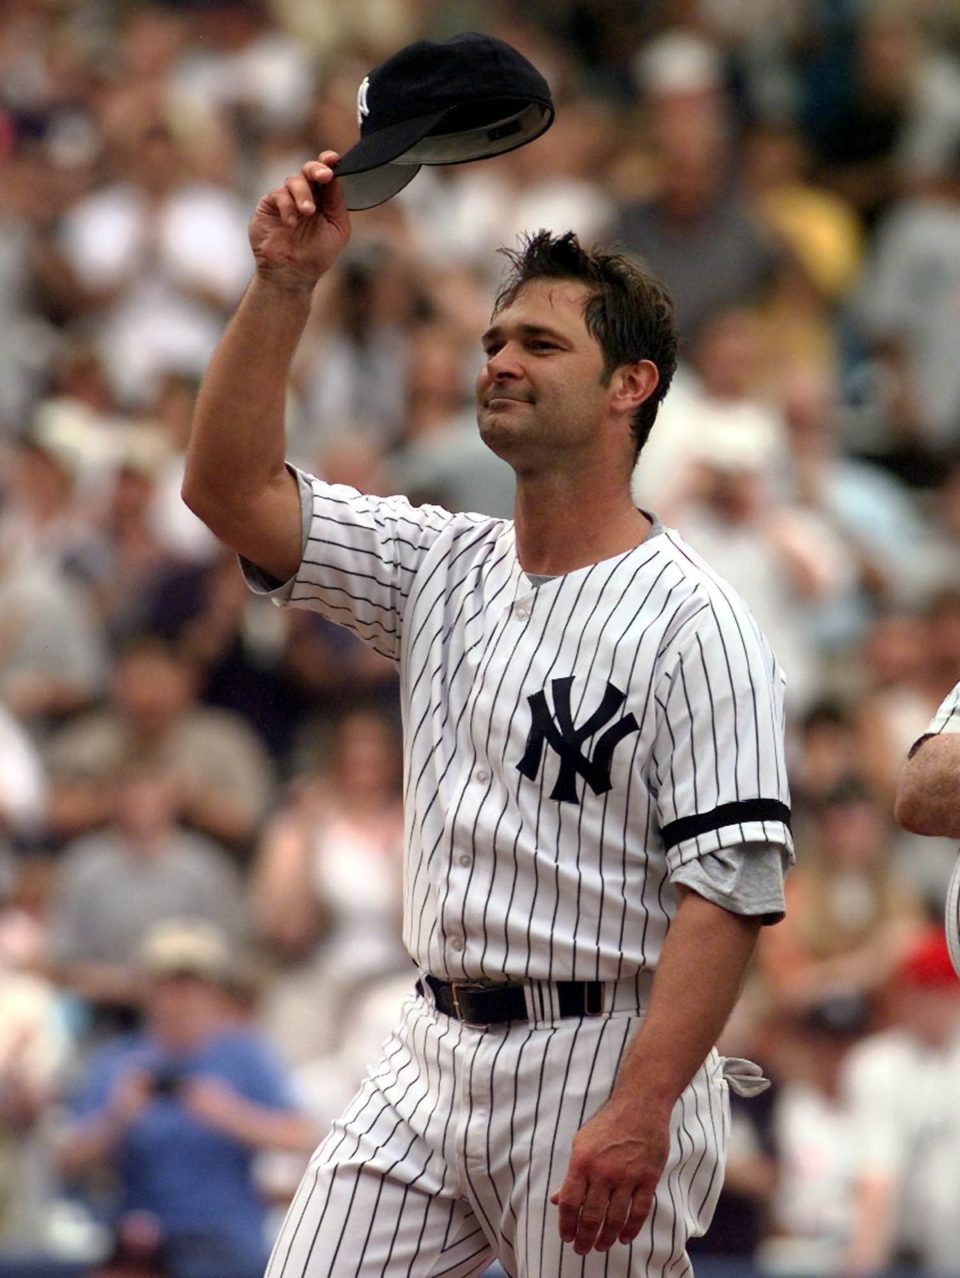 DON MATTINGLY: FAME SECOND TO FAITH AND FAMILY